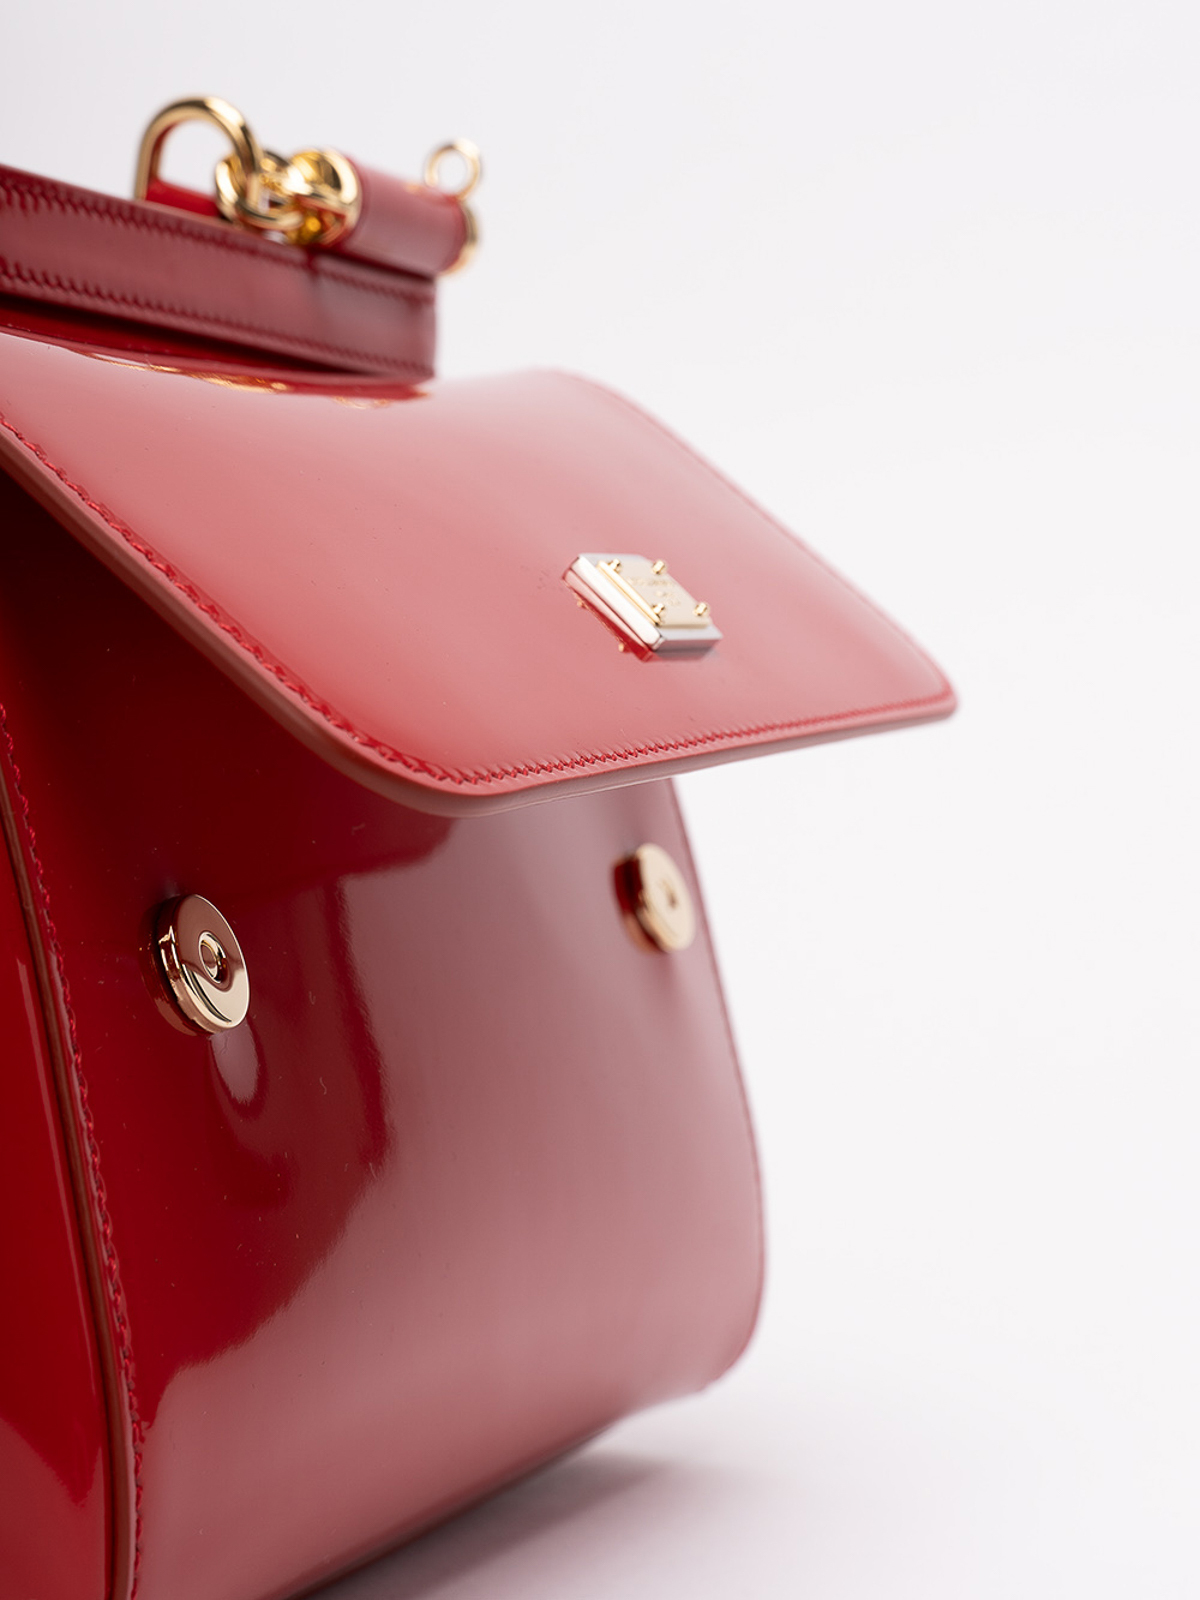 Women's Small 'sicily' Bag by Dolce & Gabbana